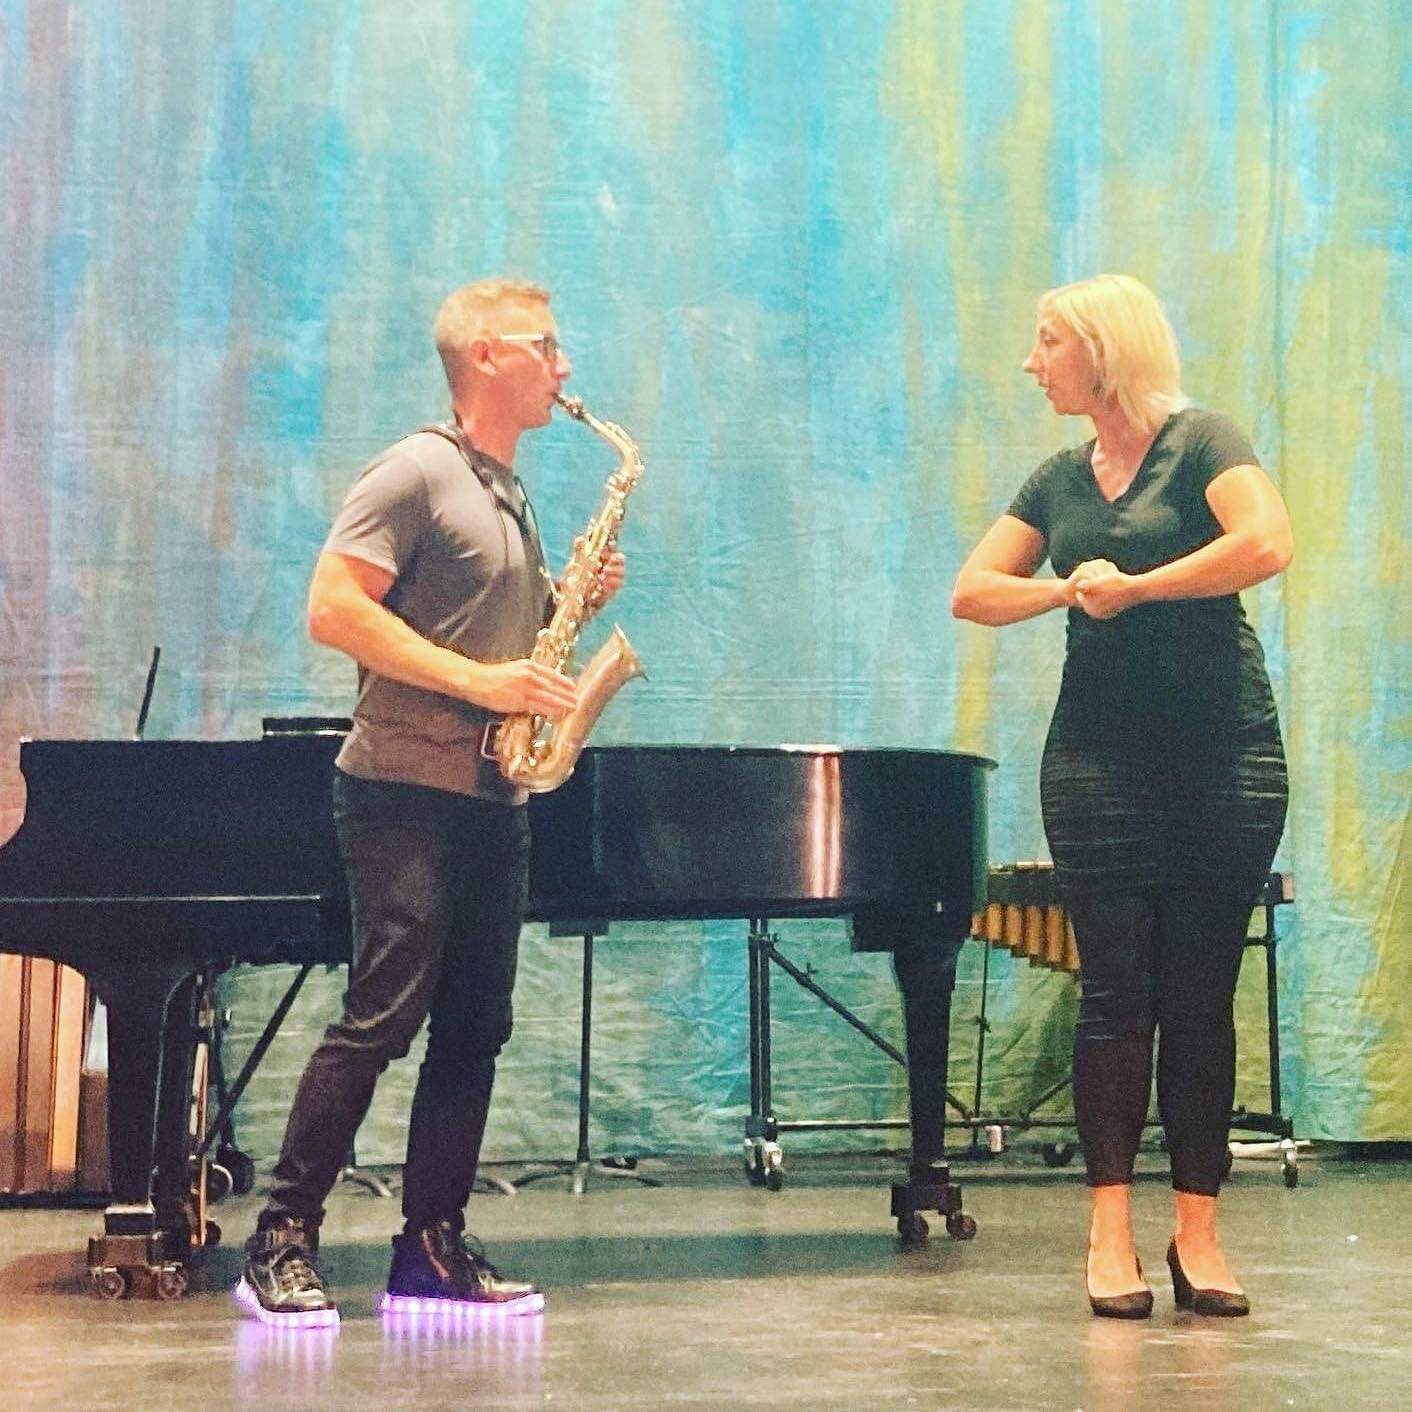 Throwback to performing @marabama&rsquo;s work The Clockmaker&rsquo;s Doll this summer at @newmusiconthebayou!
💃🏼🎷
#duo #voice #saxophone #sax #sing #singer #actor #stage #perform #performance #louisiana #neworleans #neworleansmusicians #neworlean